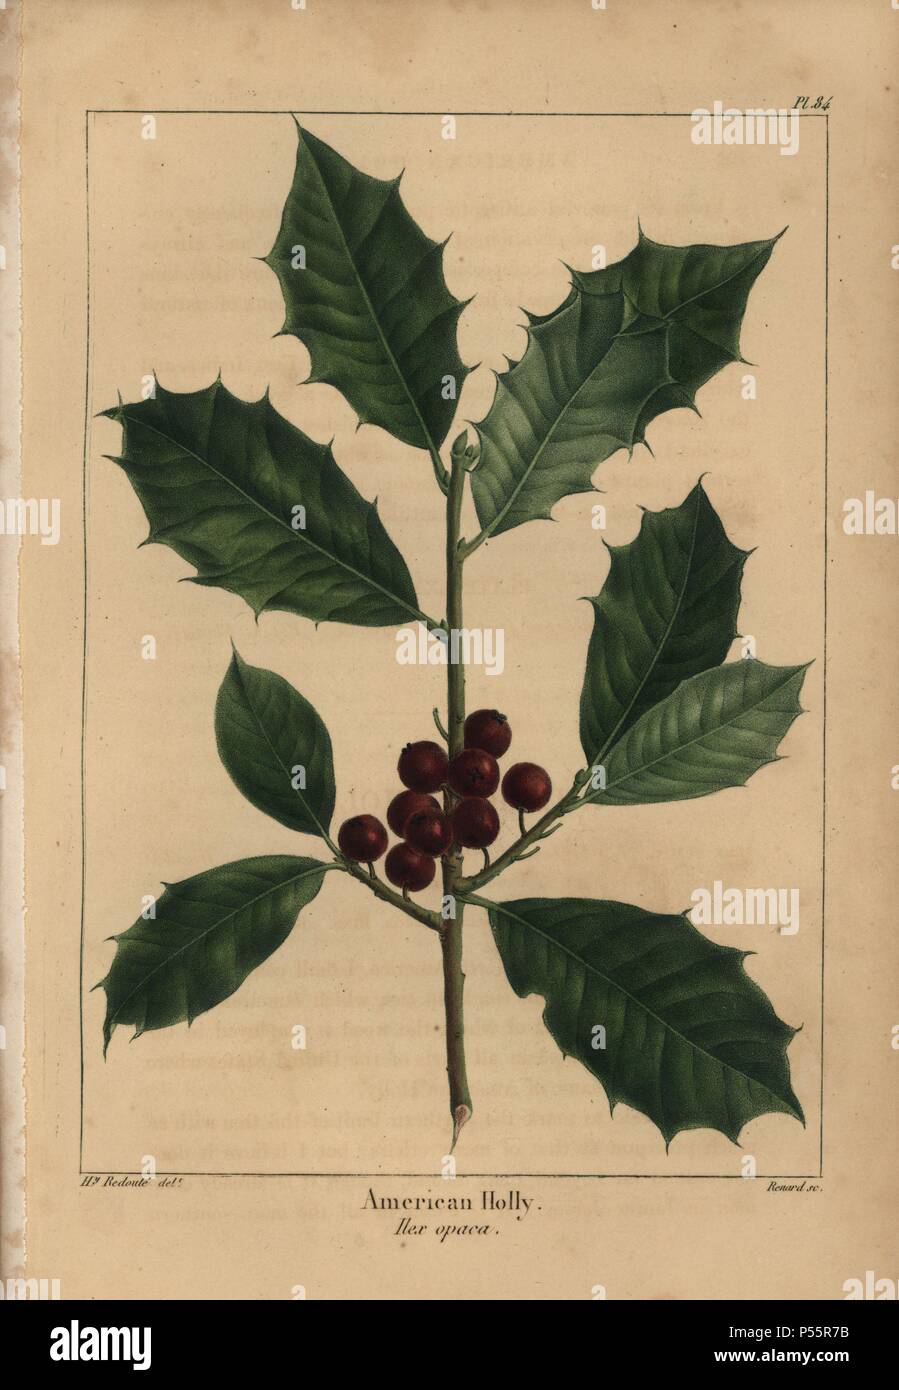 Leaves and fruit of the American holly, Ilex opaca. Handcolored stipple engraving from a botanical illustration by Henri Joseph Redoute, engraved on copper by Gabriel, from Francois Andre Michaux's 'North American Sylva,' Philadelphia, 1857. French botanist Michaux (1770-1855) explored America and Canada in 1785 cataloging its native trees. Stock Photo